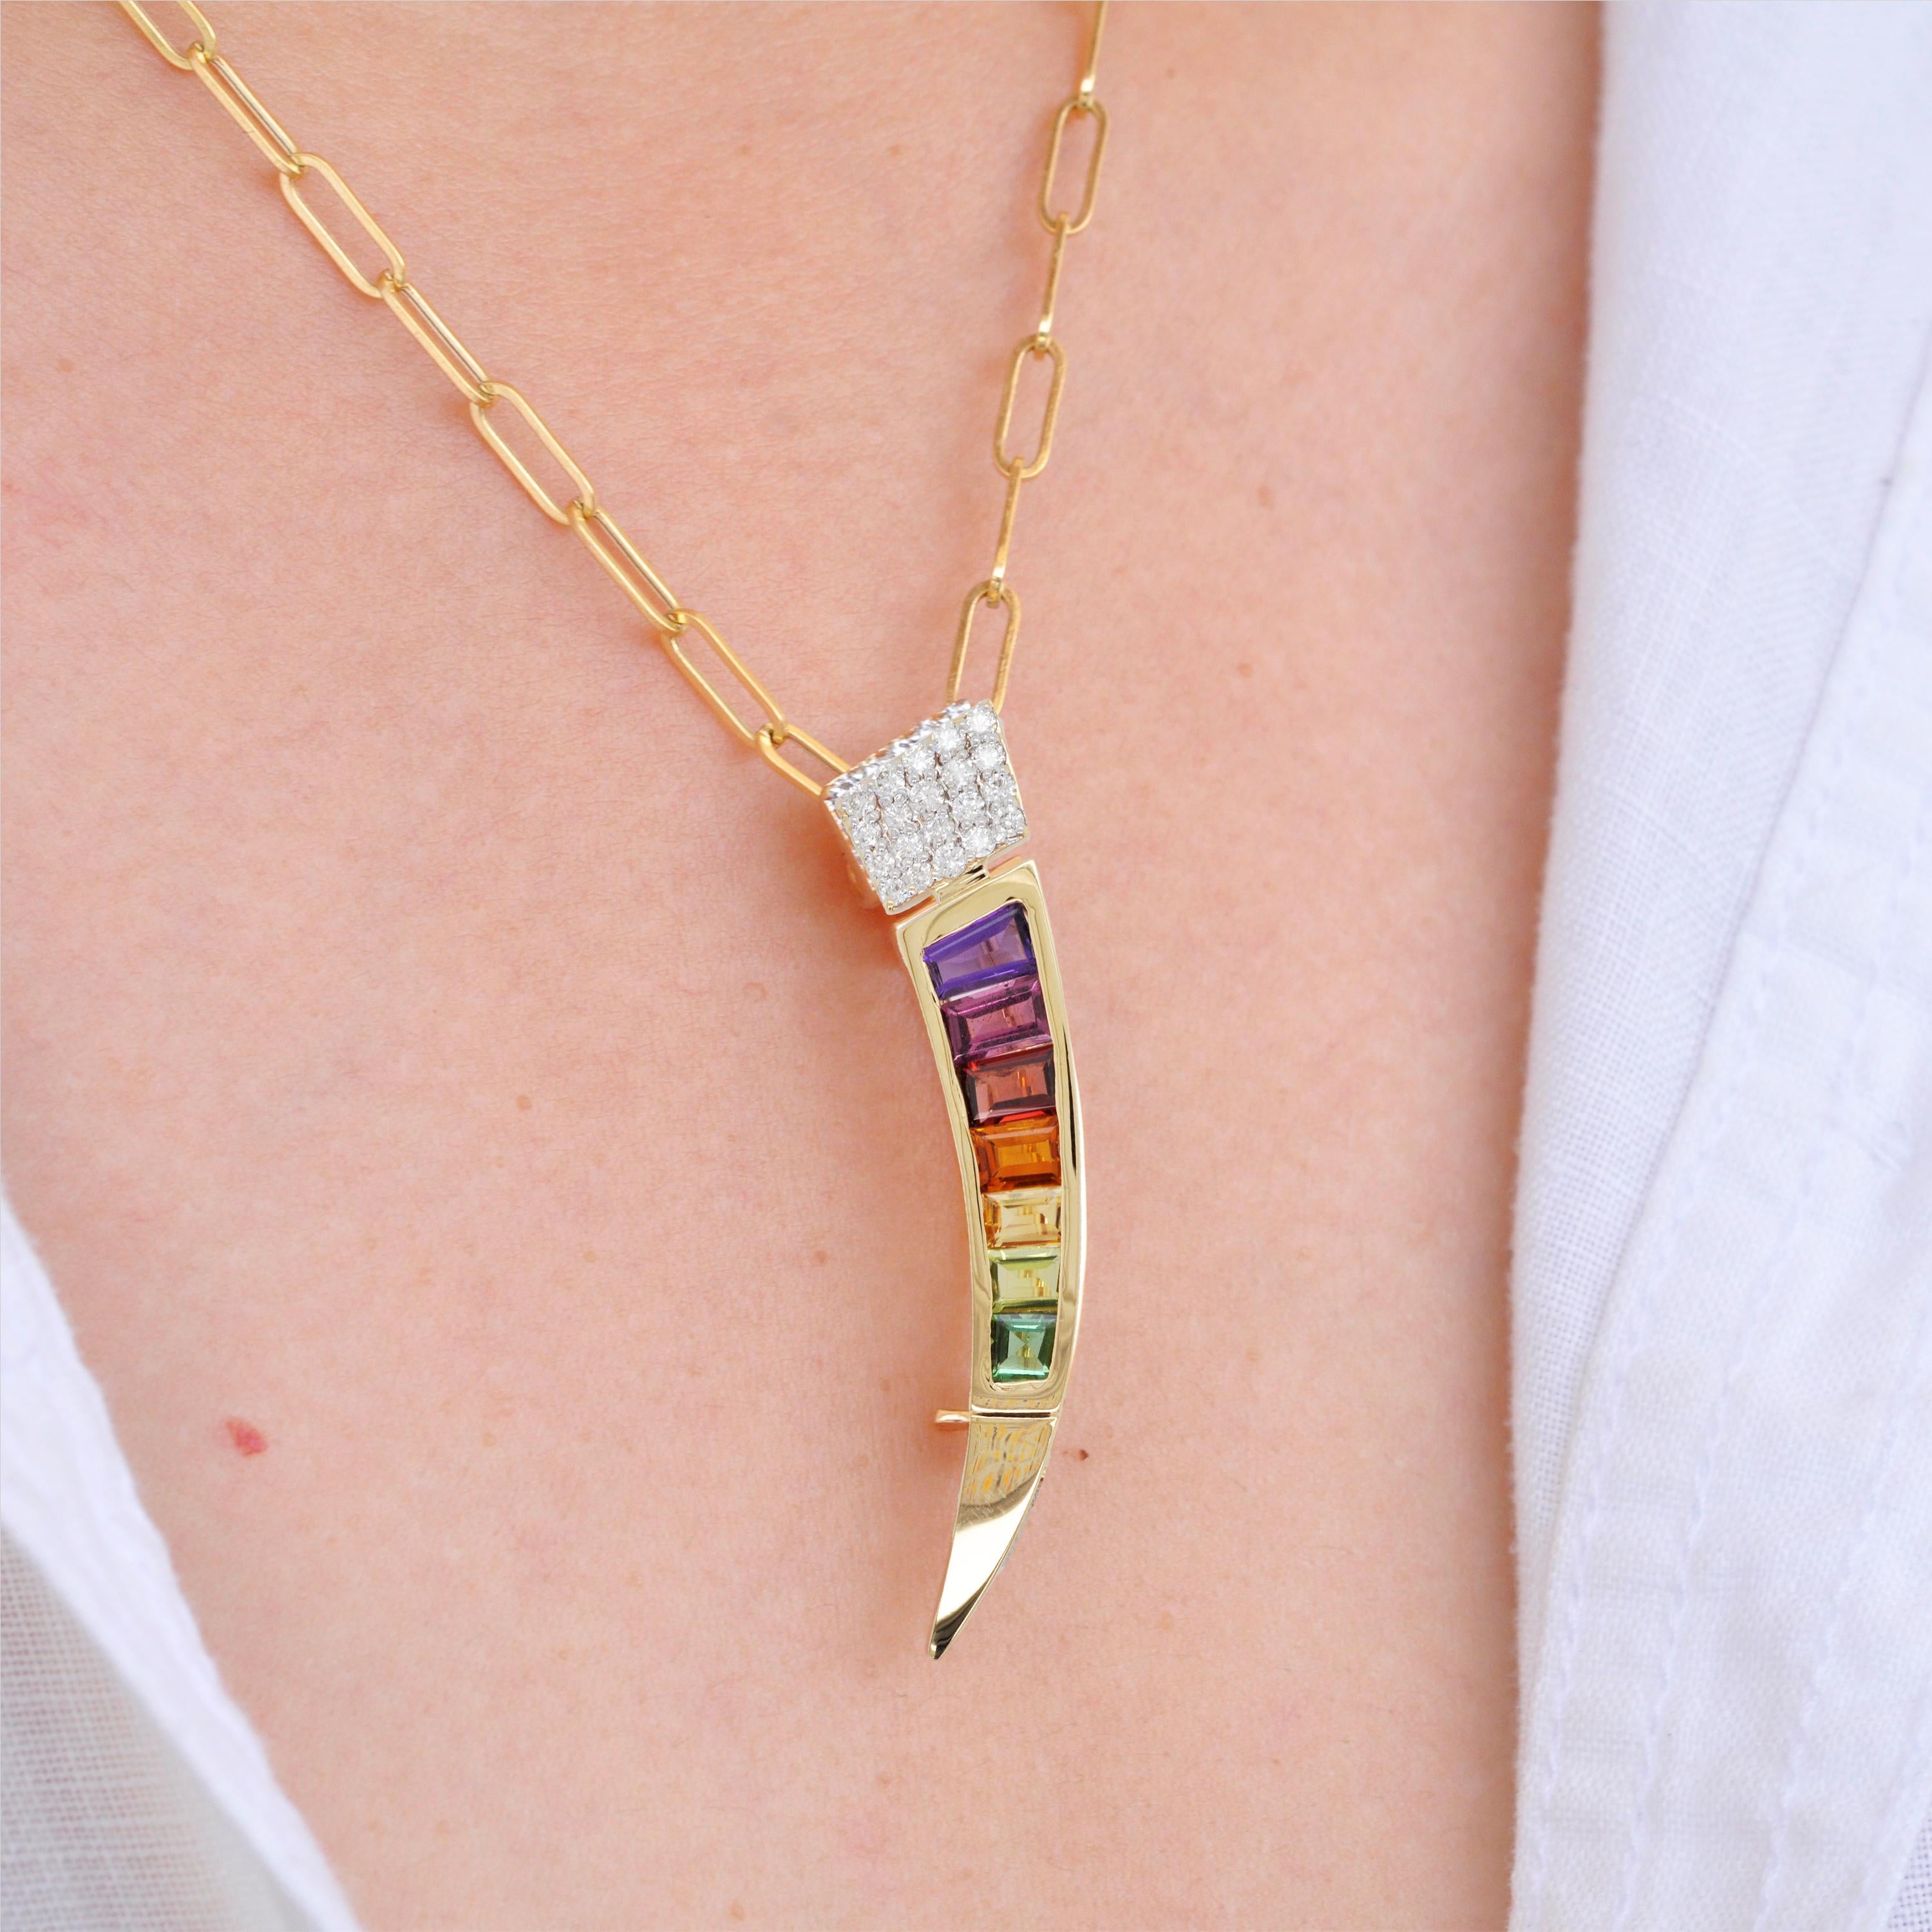 18 karat gold Muticolor Rainbow tapered baguette diamond pendant brooch

This edgy pendant brooch is a striking and contemporary piece of jewelry that combines vibrant multicolored gemstones with the elegance of 18 karat gold. The design features